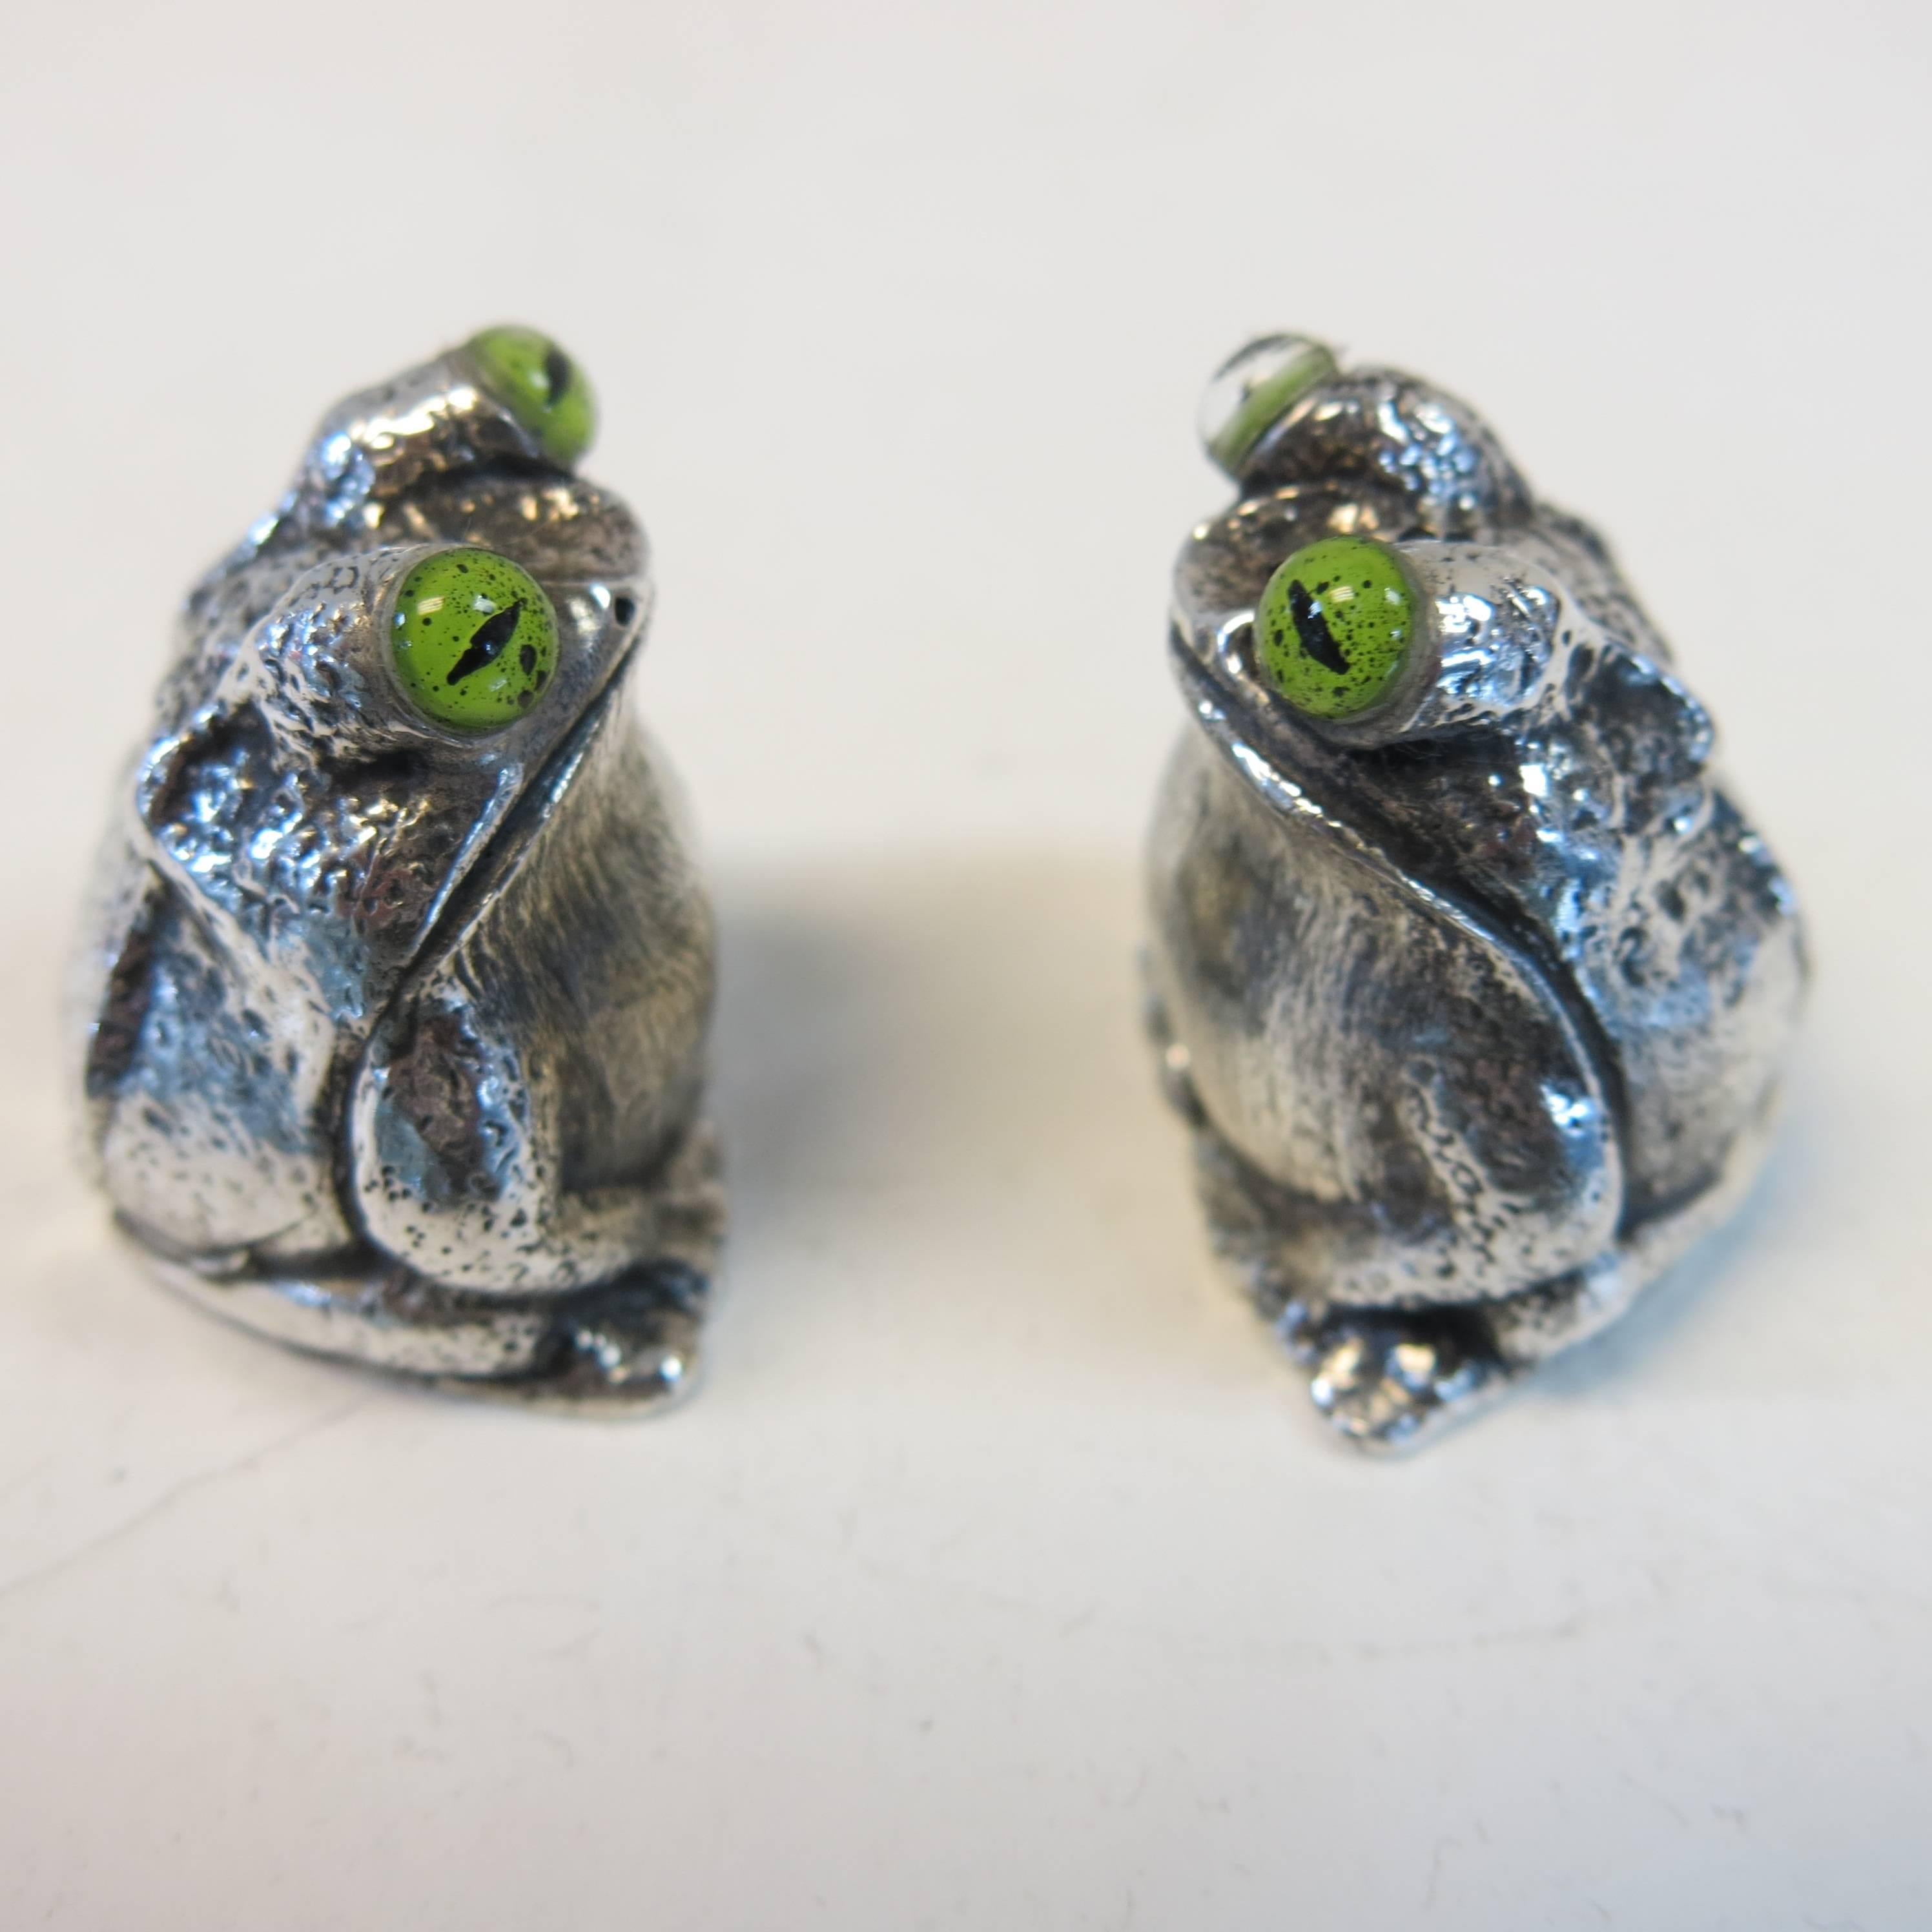 English, sterling silver, hallmarked salt and pepper frogs. Great quality and condition. Novel and decorative.